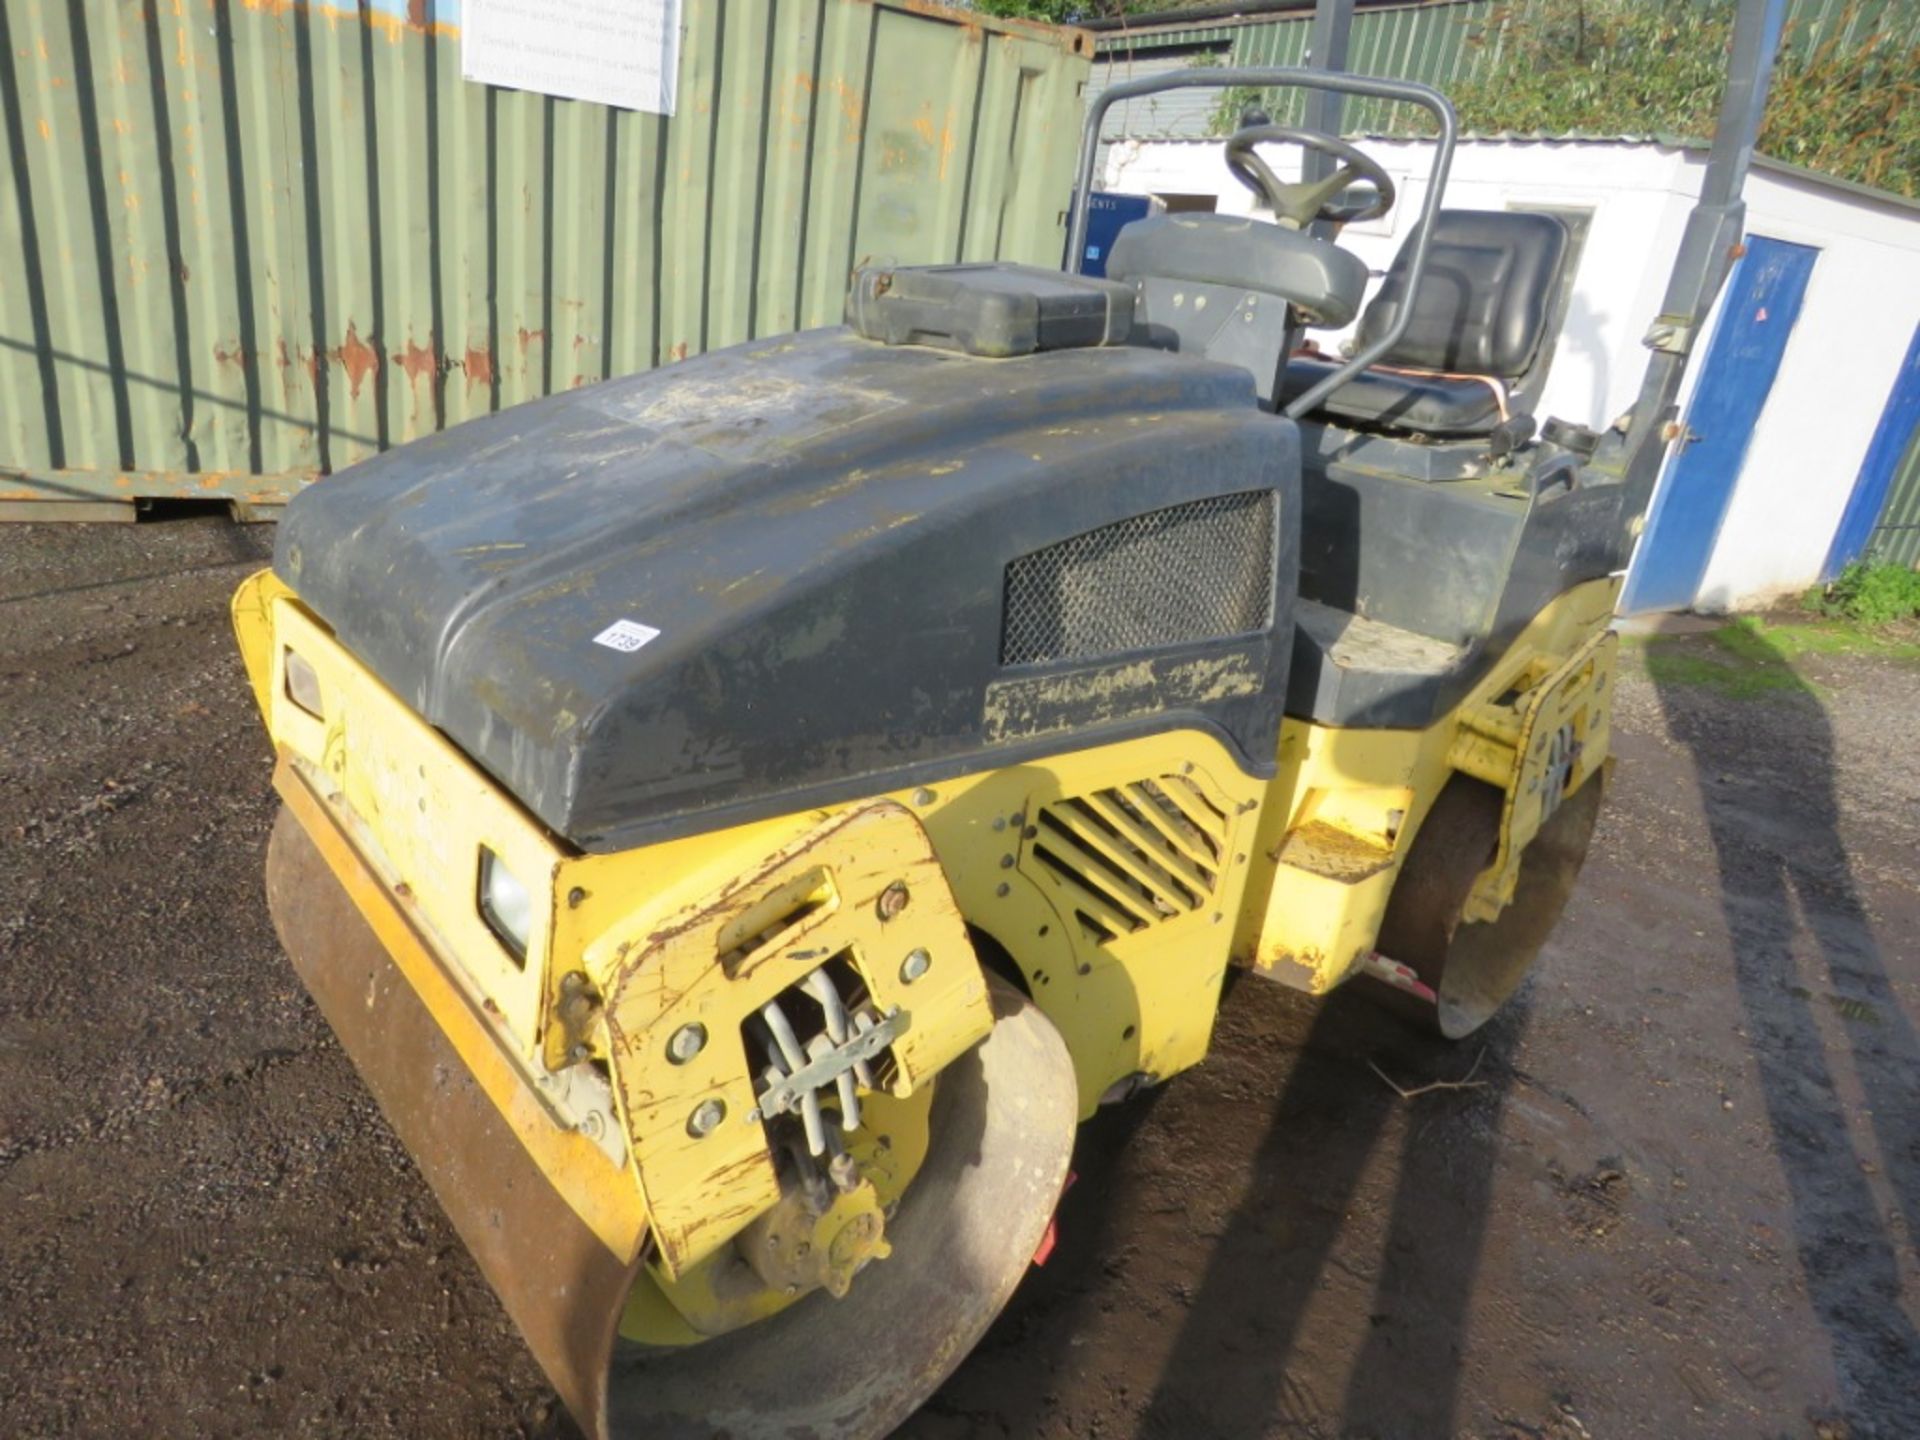 BID INCREMENT NOW £50! BOMAG 120AD-4 DOUBLE DRUM ROLLER, YEAR 2007.